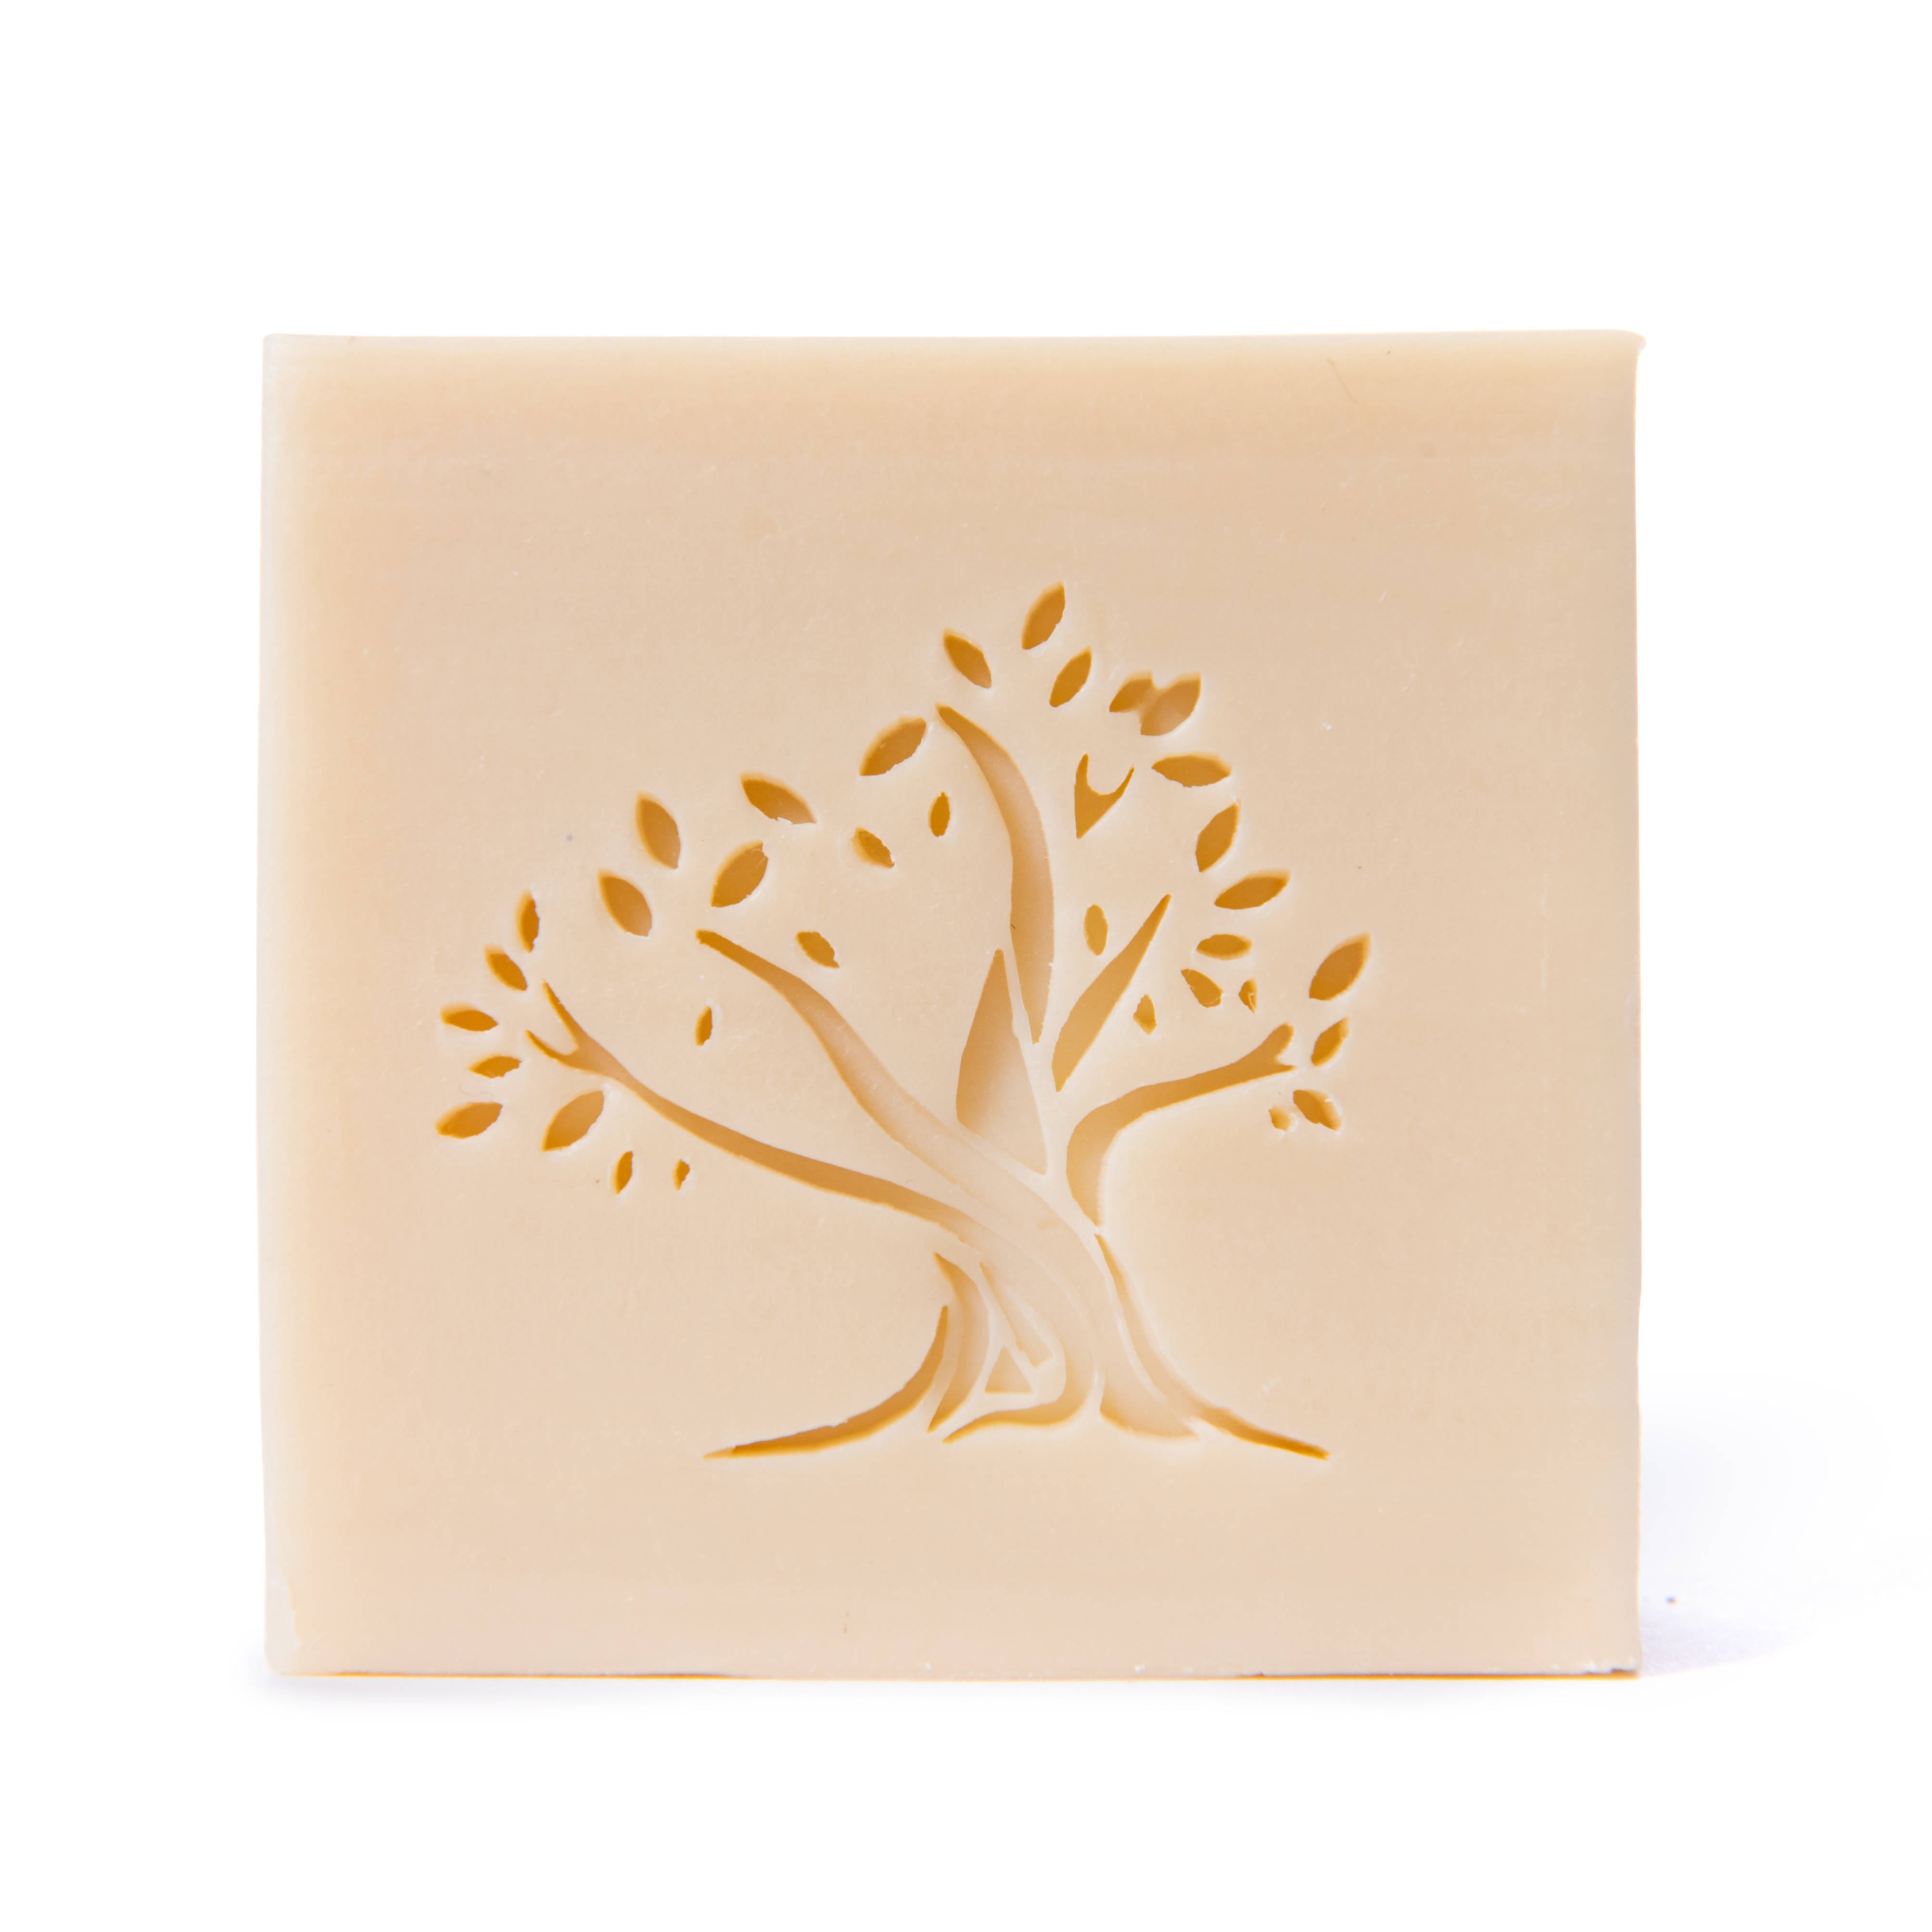 Handcrafted Handmade Hand Stamped Artisanal Soap